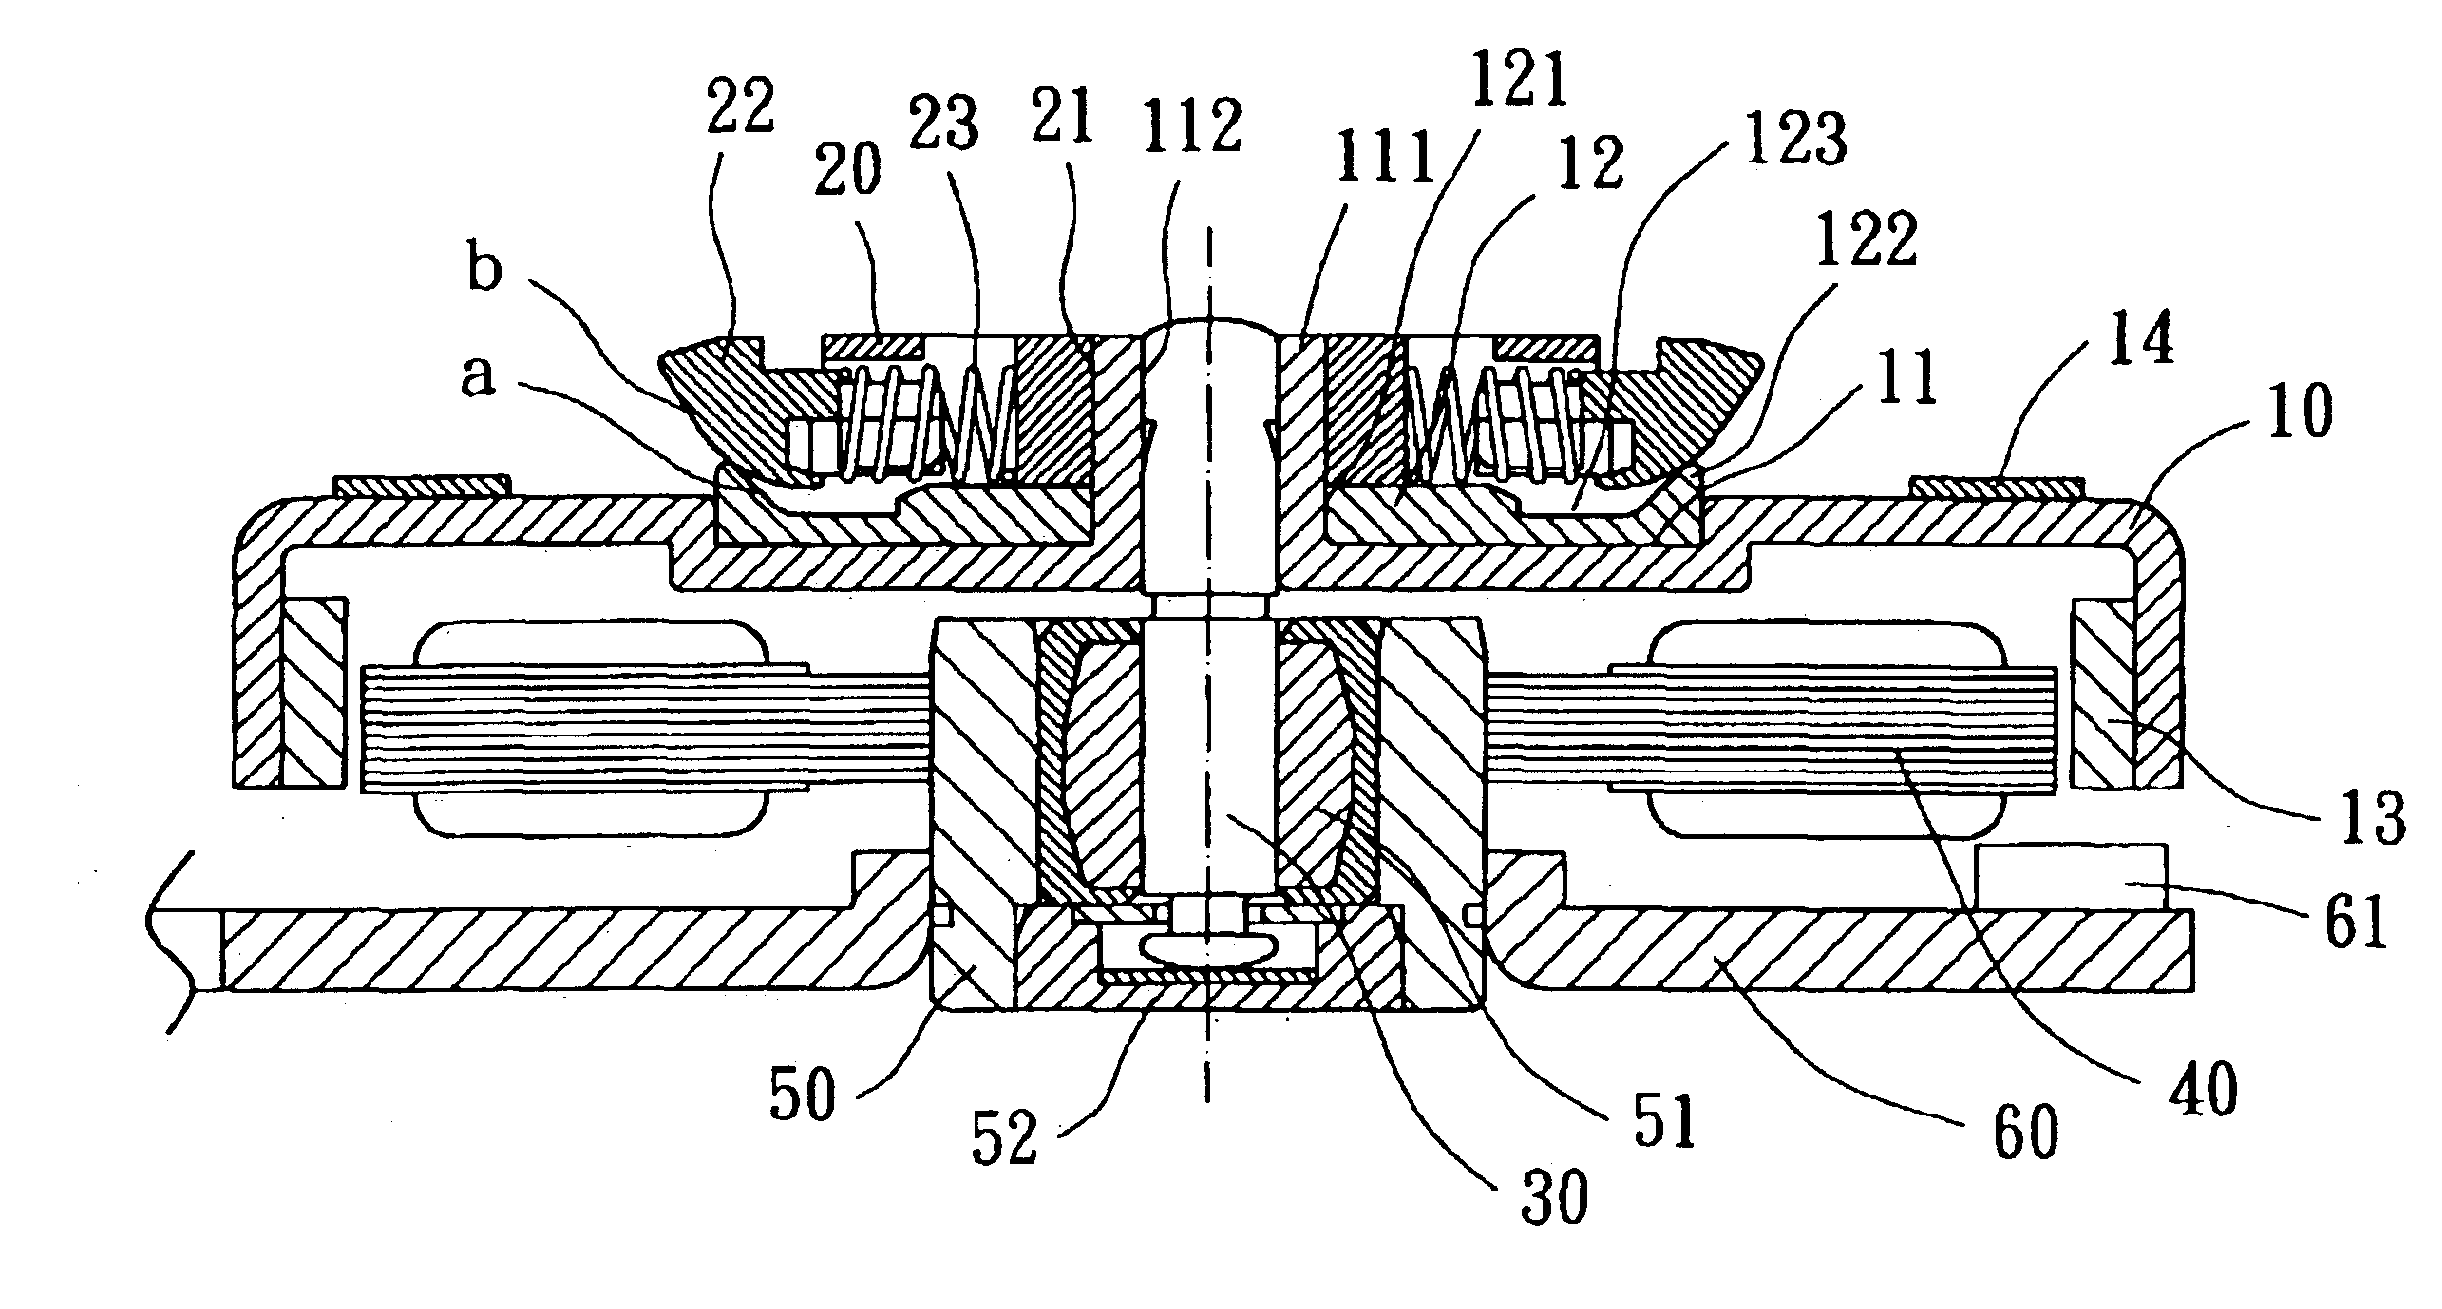 Disc carrier having a clamping device for use in an optical disc drive